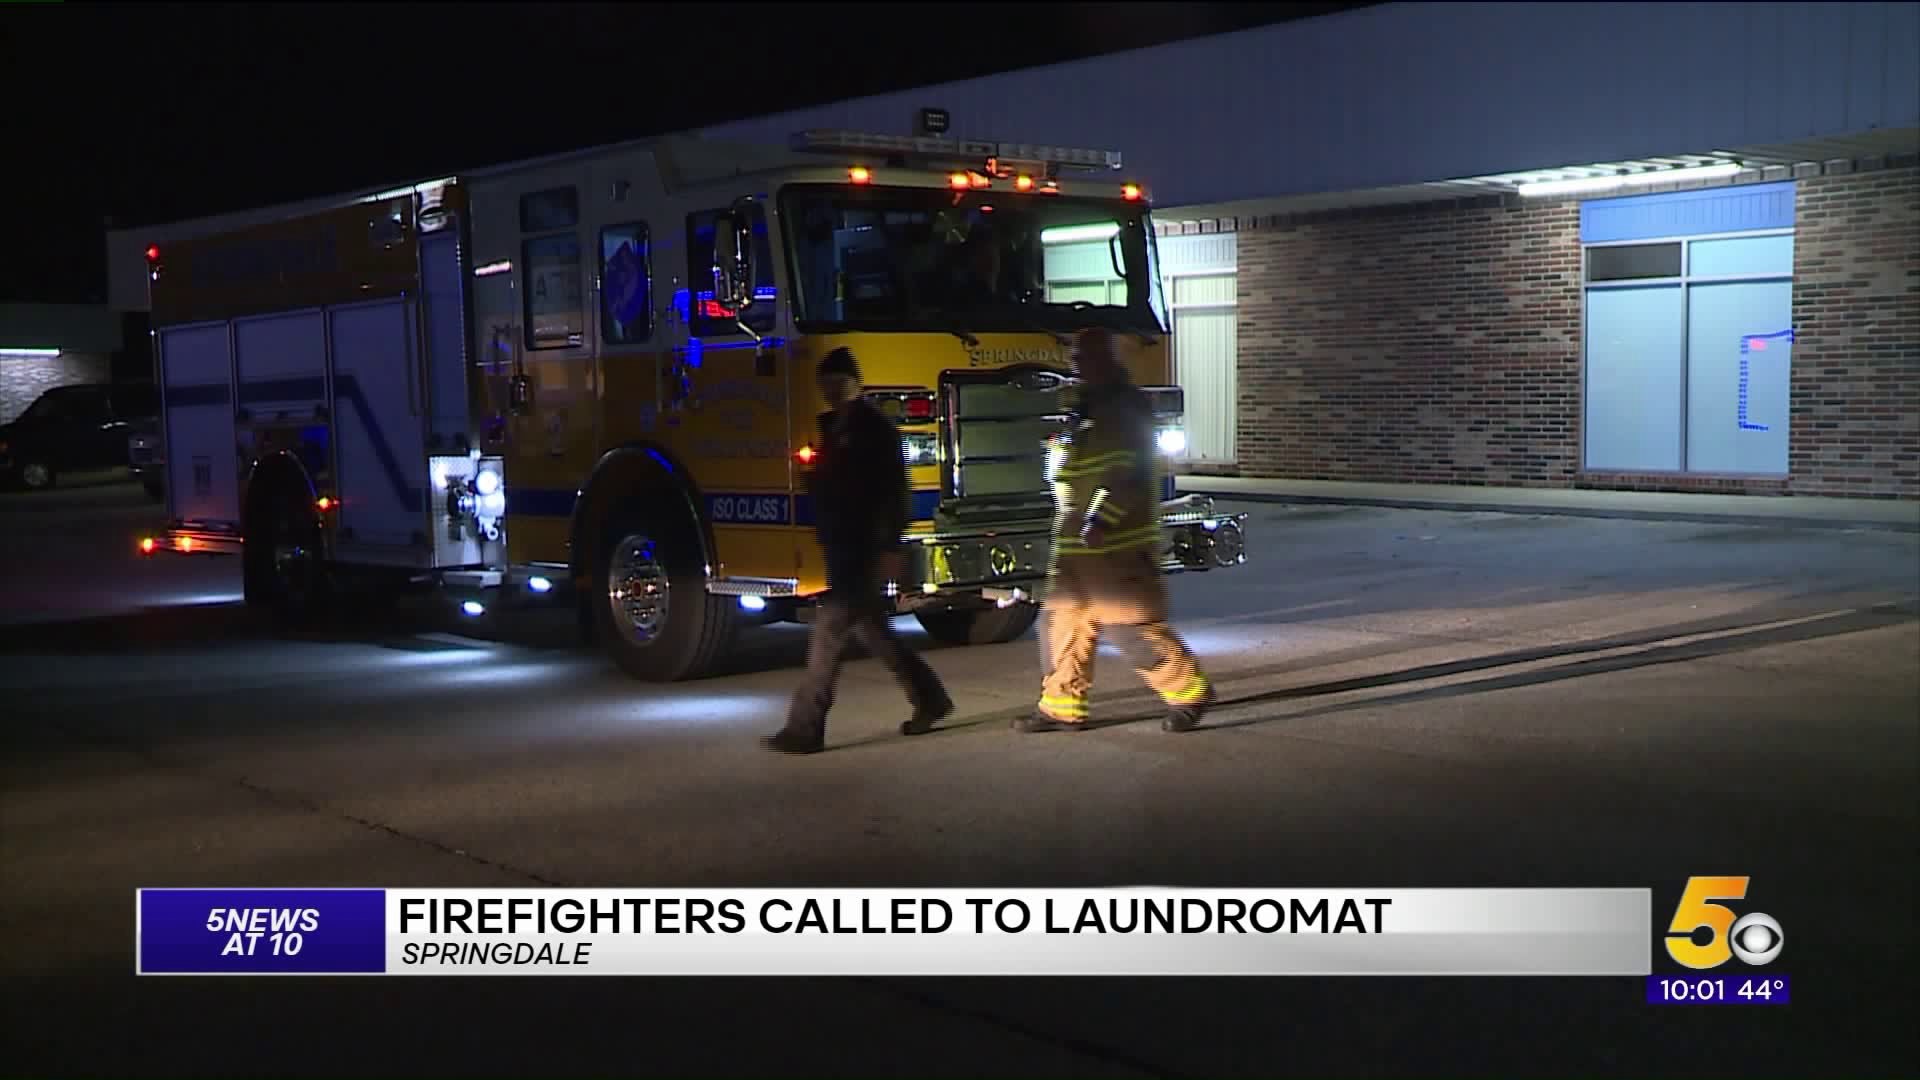 24/7 Laundromat In Springdale Evacuated After Washer Malfunction